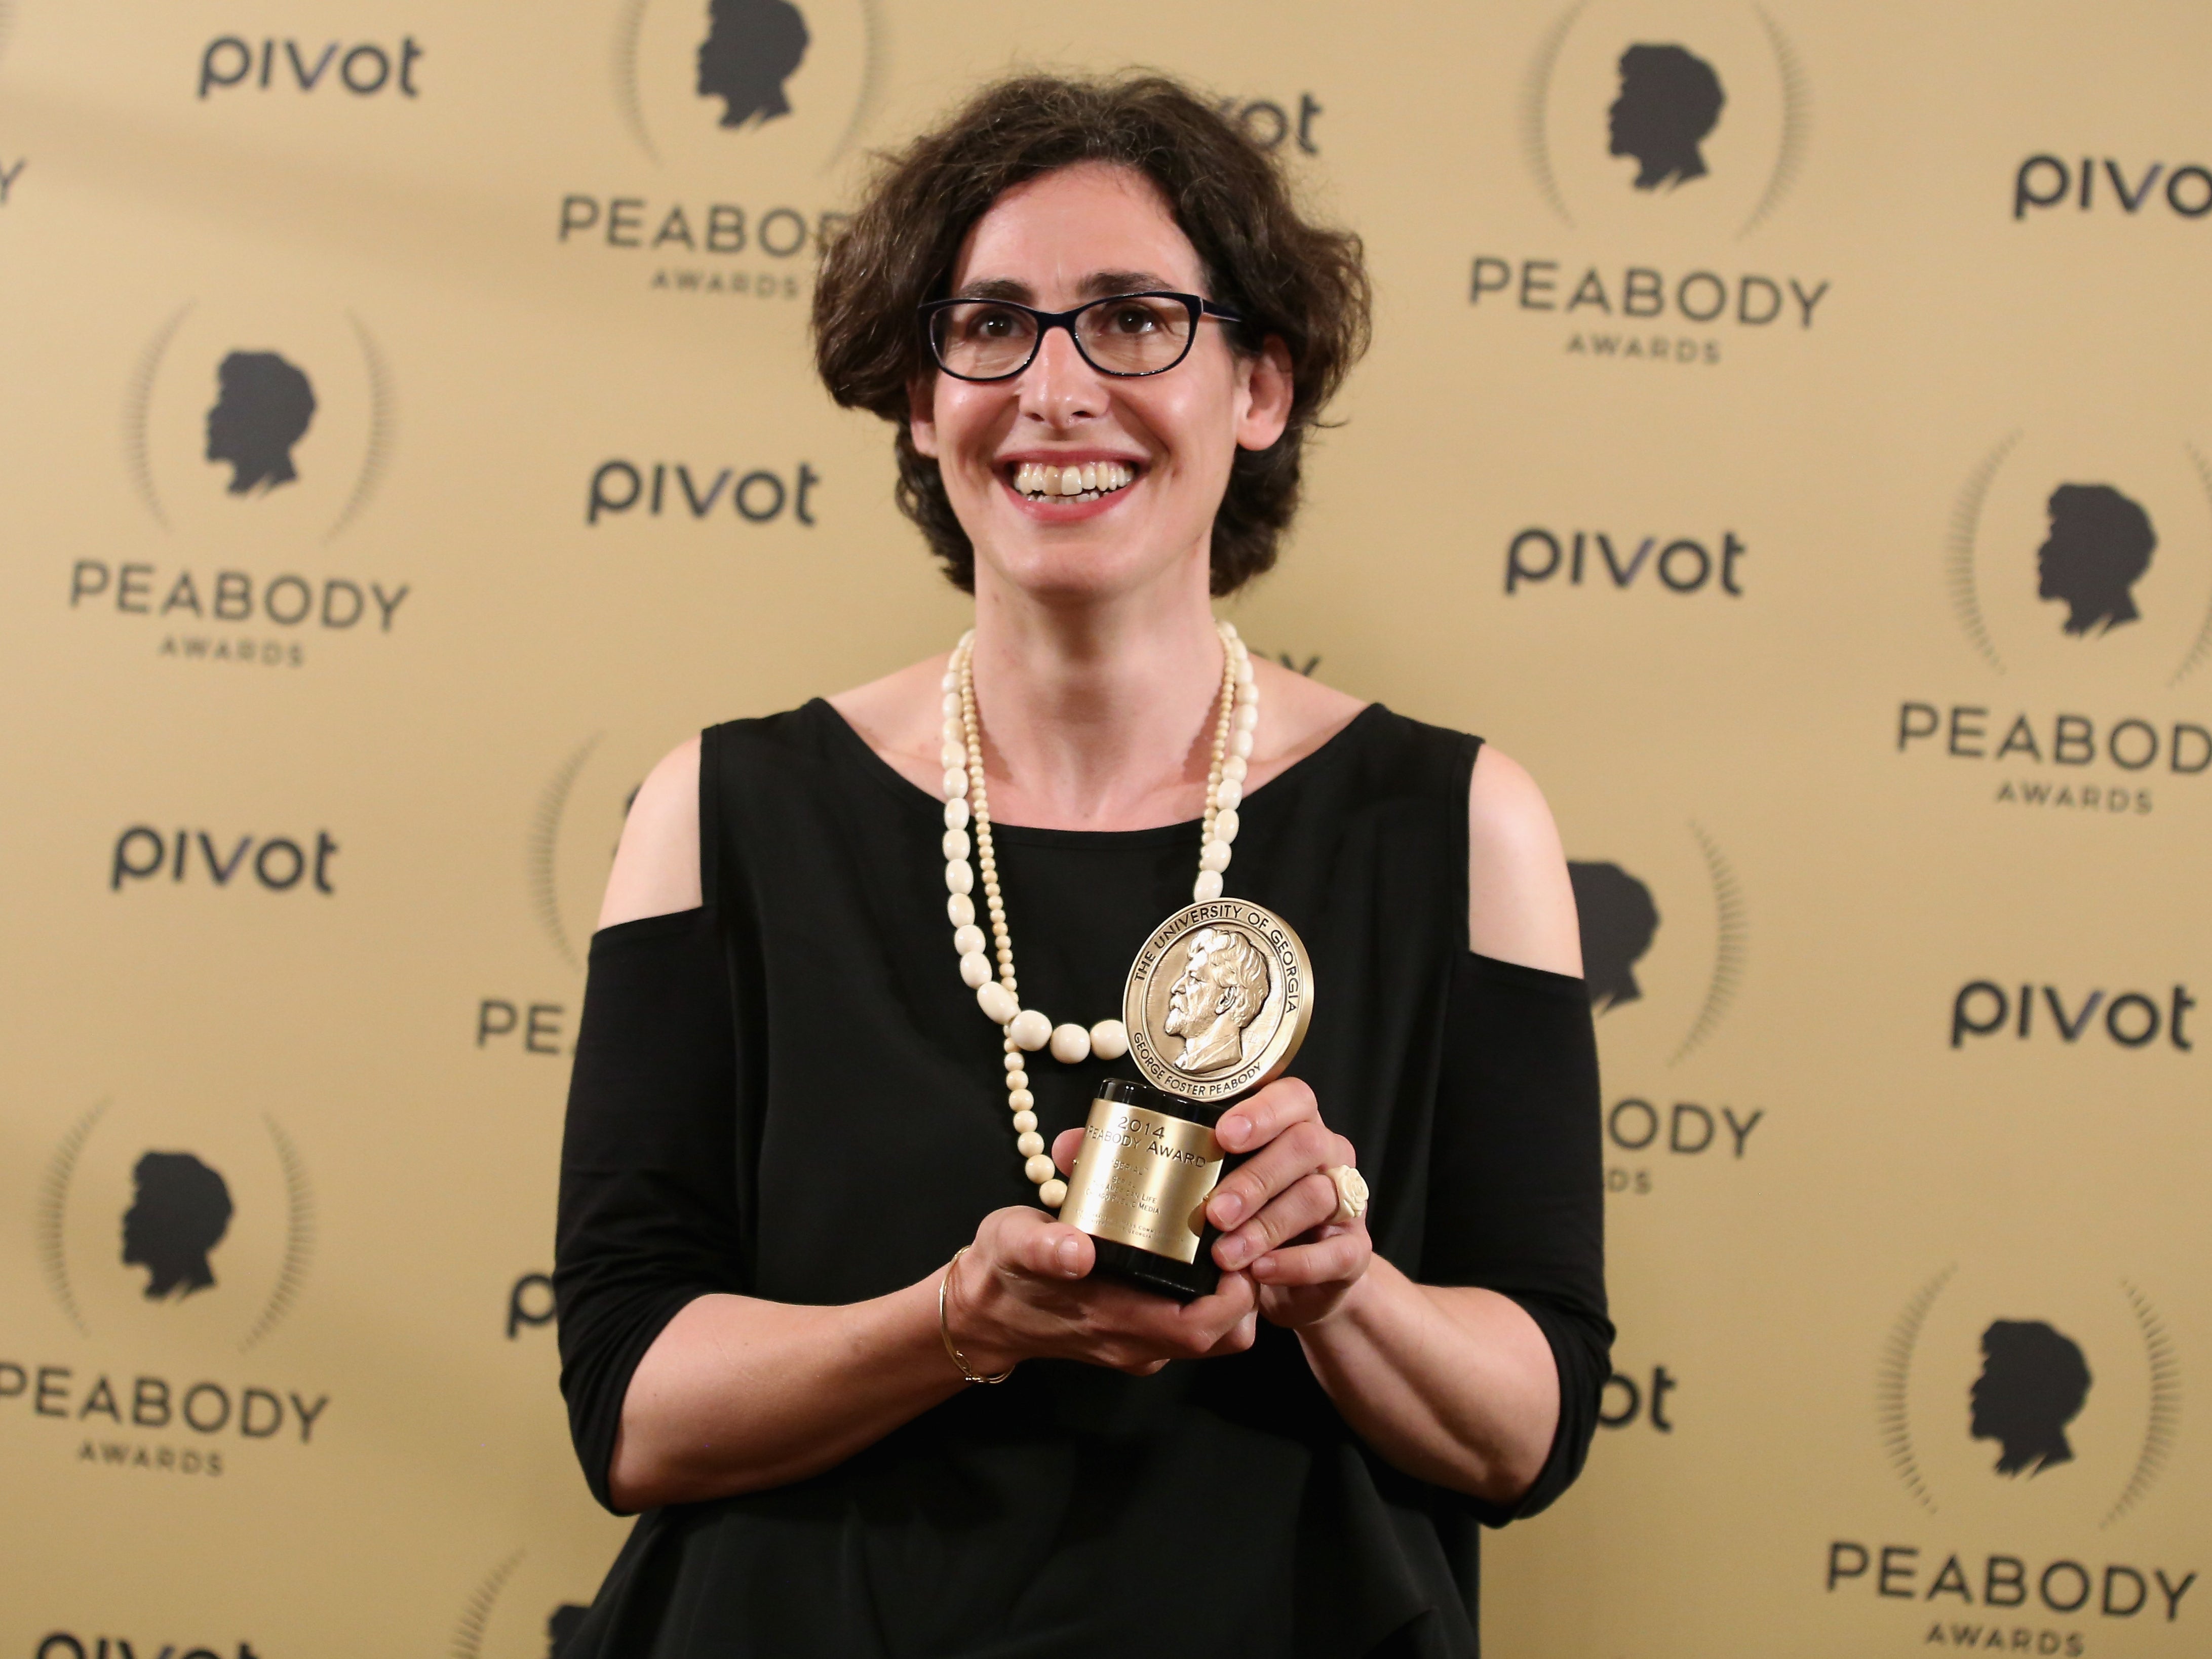 Sarah Koenig poses with her award at the 74th Annual Peabody Awards ceremony on 31 May 2015 in New York City